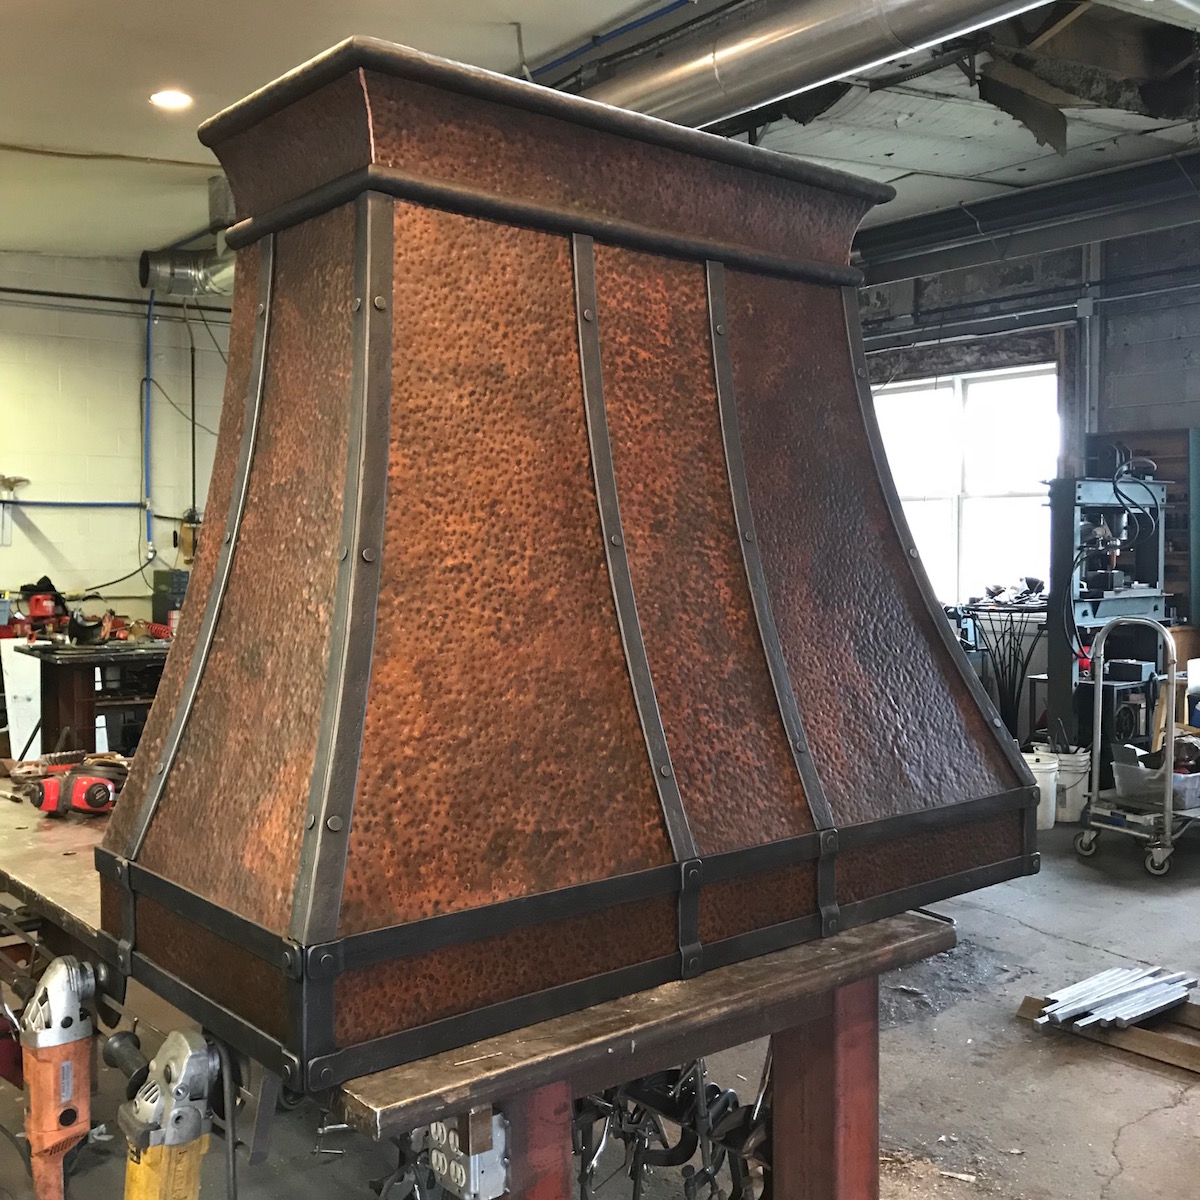 Red Iron Range Hoods - A Mead Metals Success Story